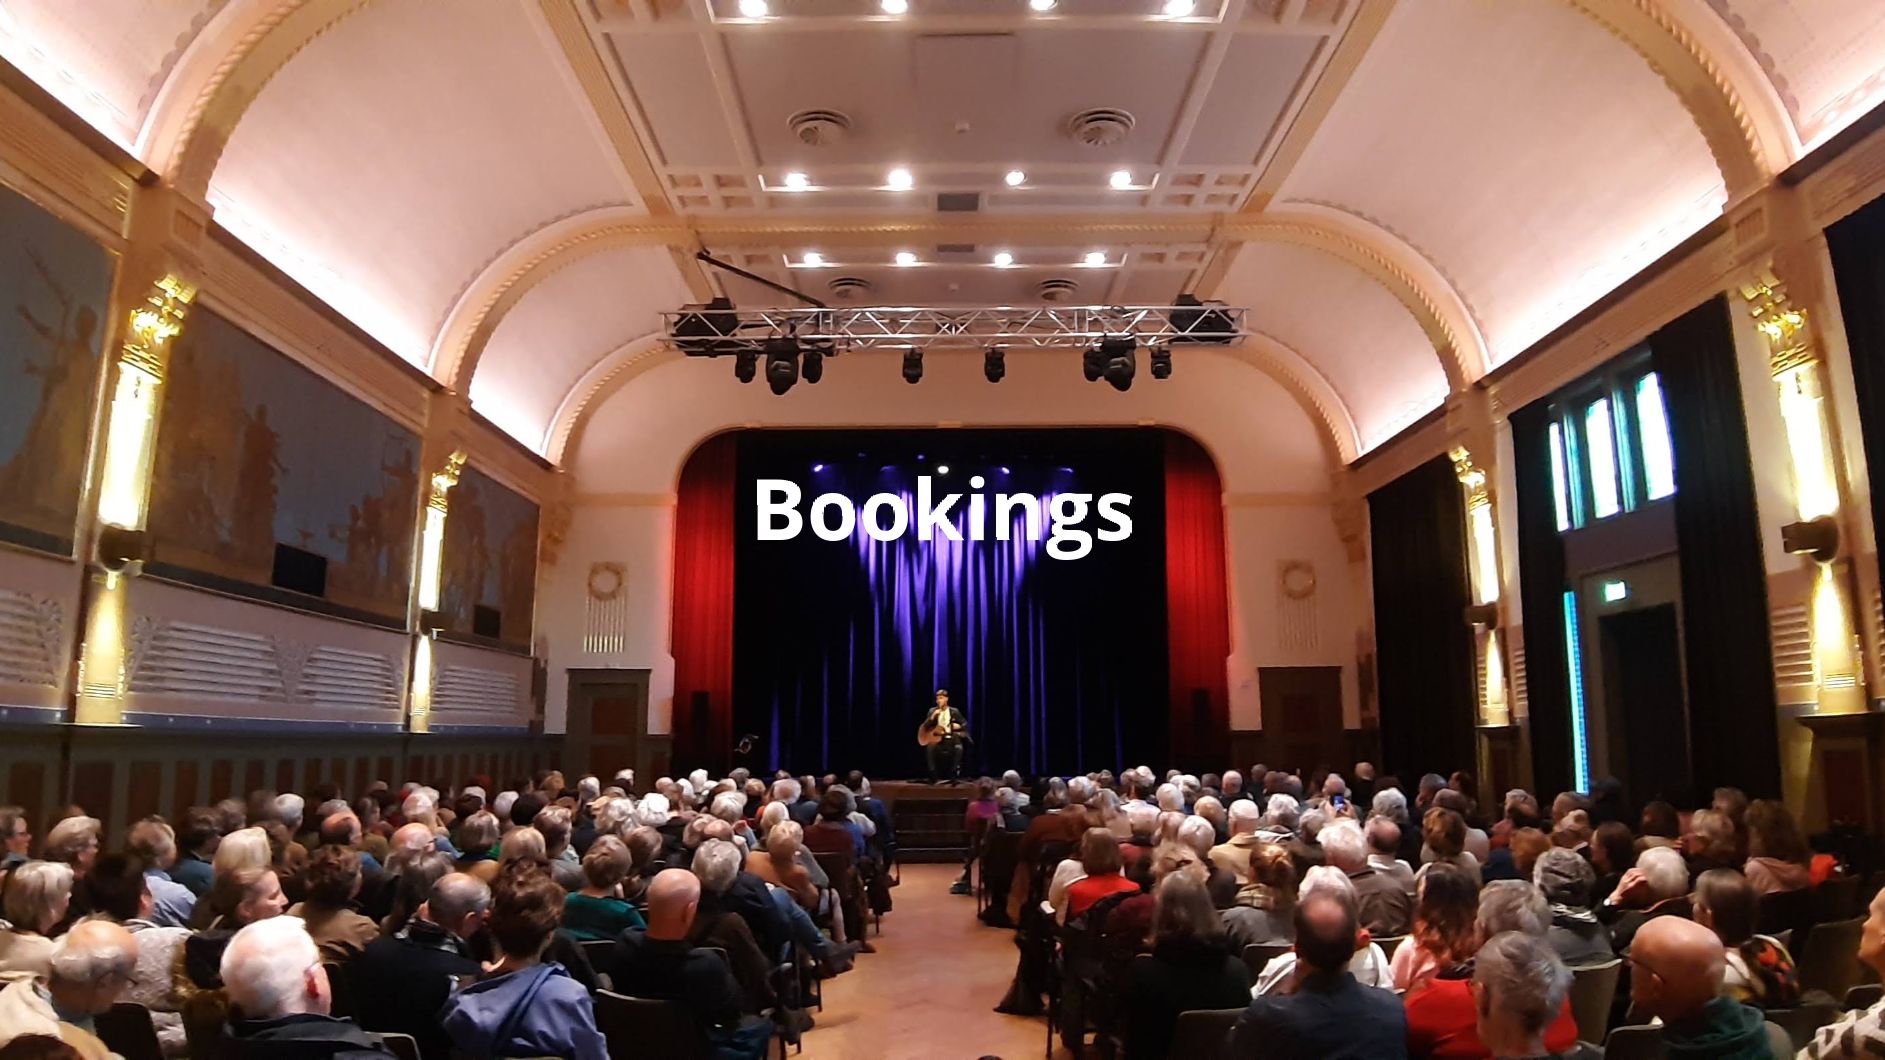 info about bookings of cencerts, weddings etc